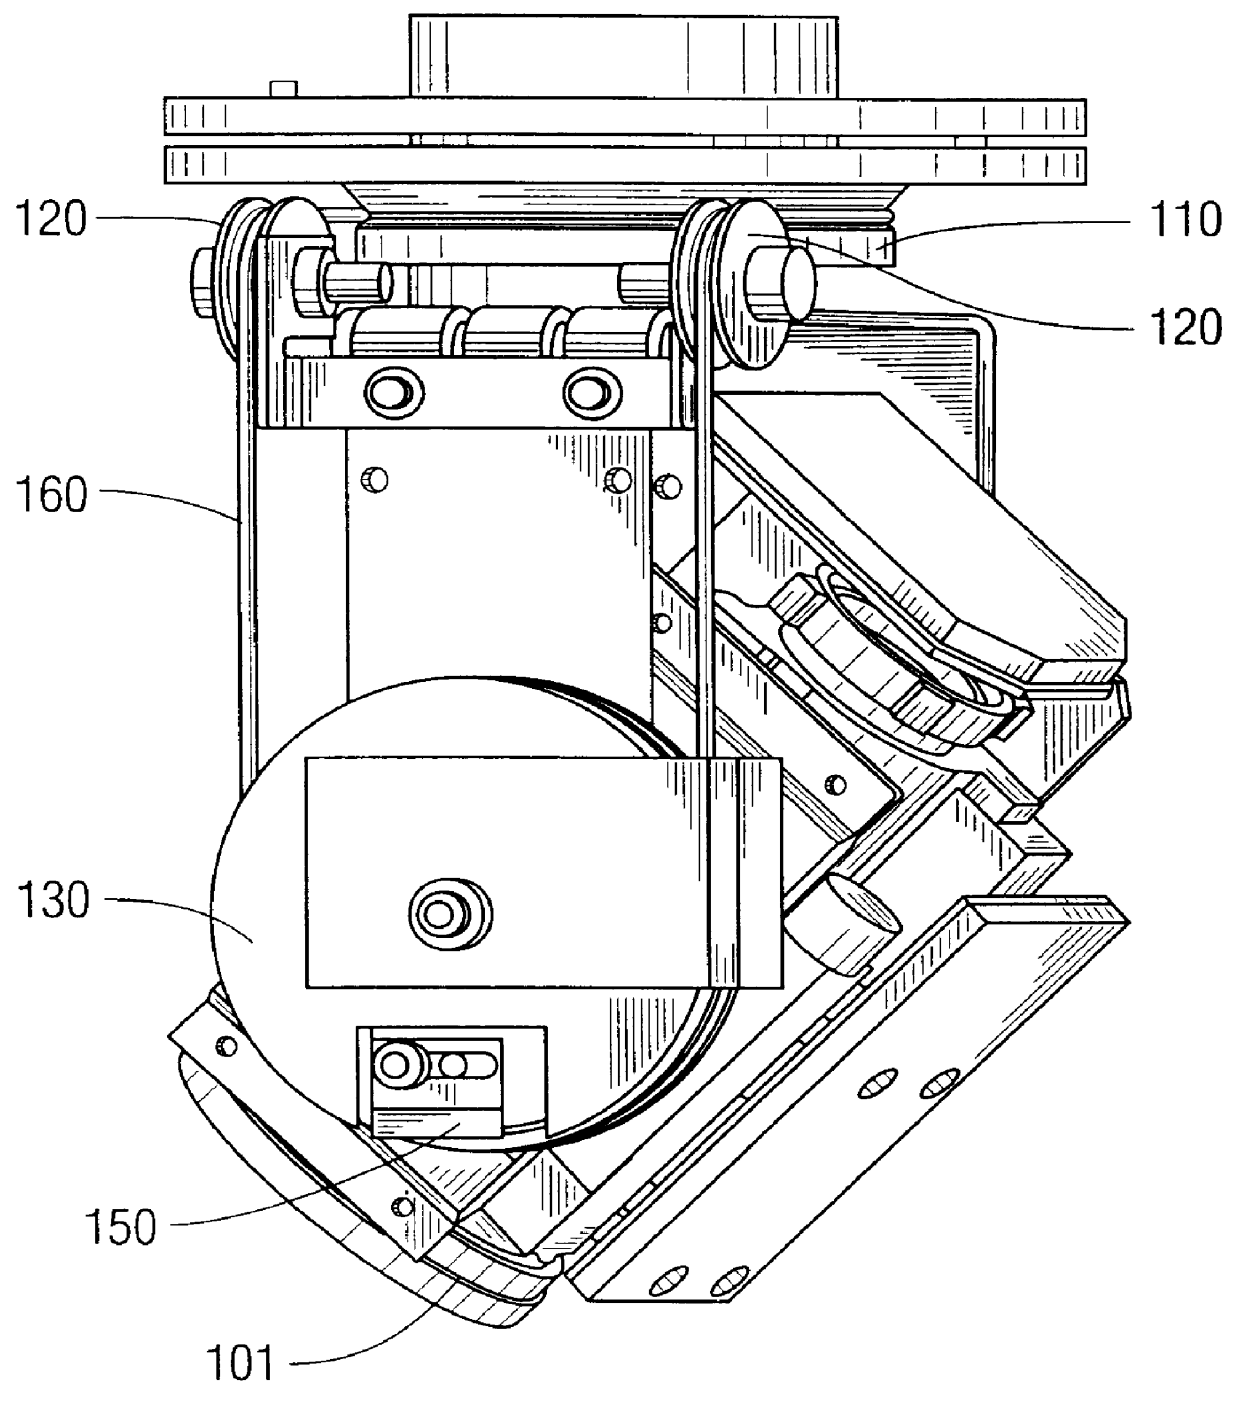 Positioning system for an observation device using a tensioned filament and locator ball